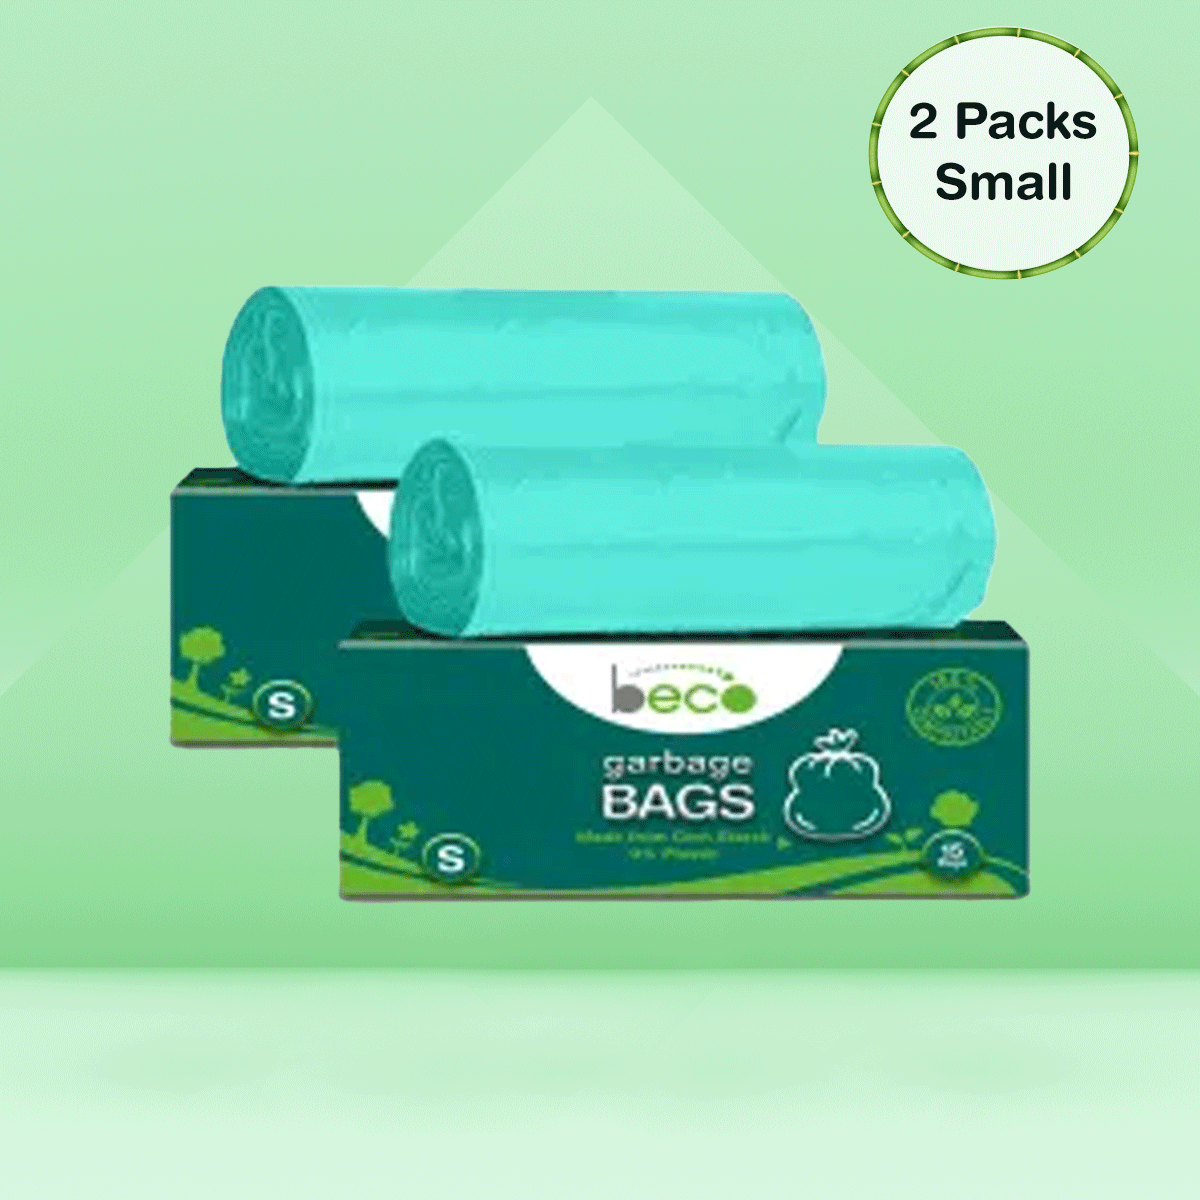 Biodegradable Garbage Bags - Small Size - Pack of 2 